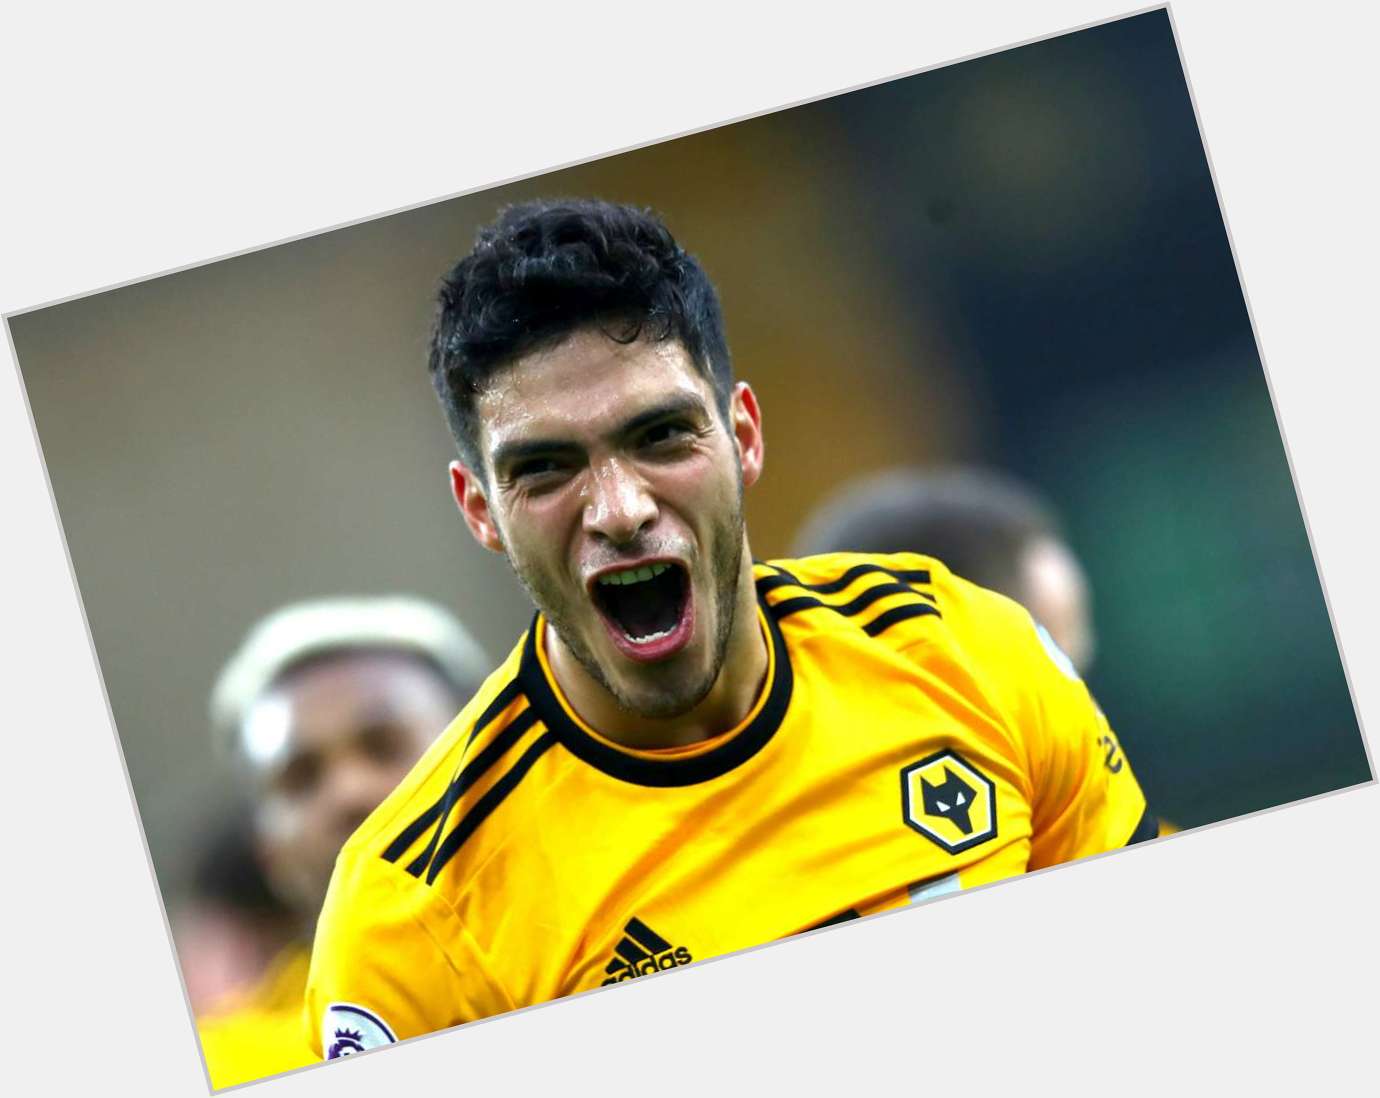 Happy 30th birthday to Raul Jimenez   Can\t wait to see him on the pitch again 